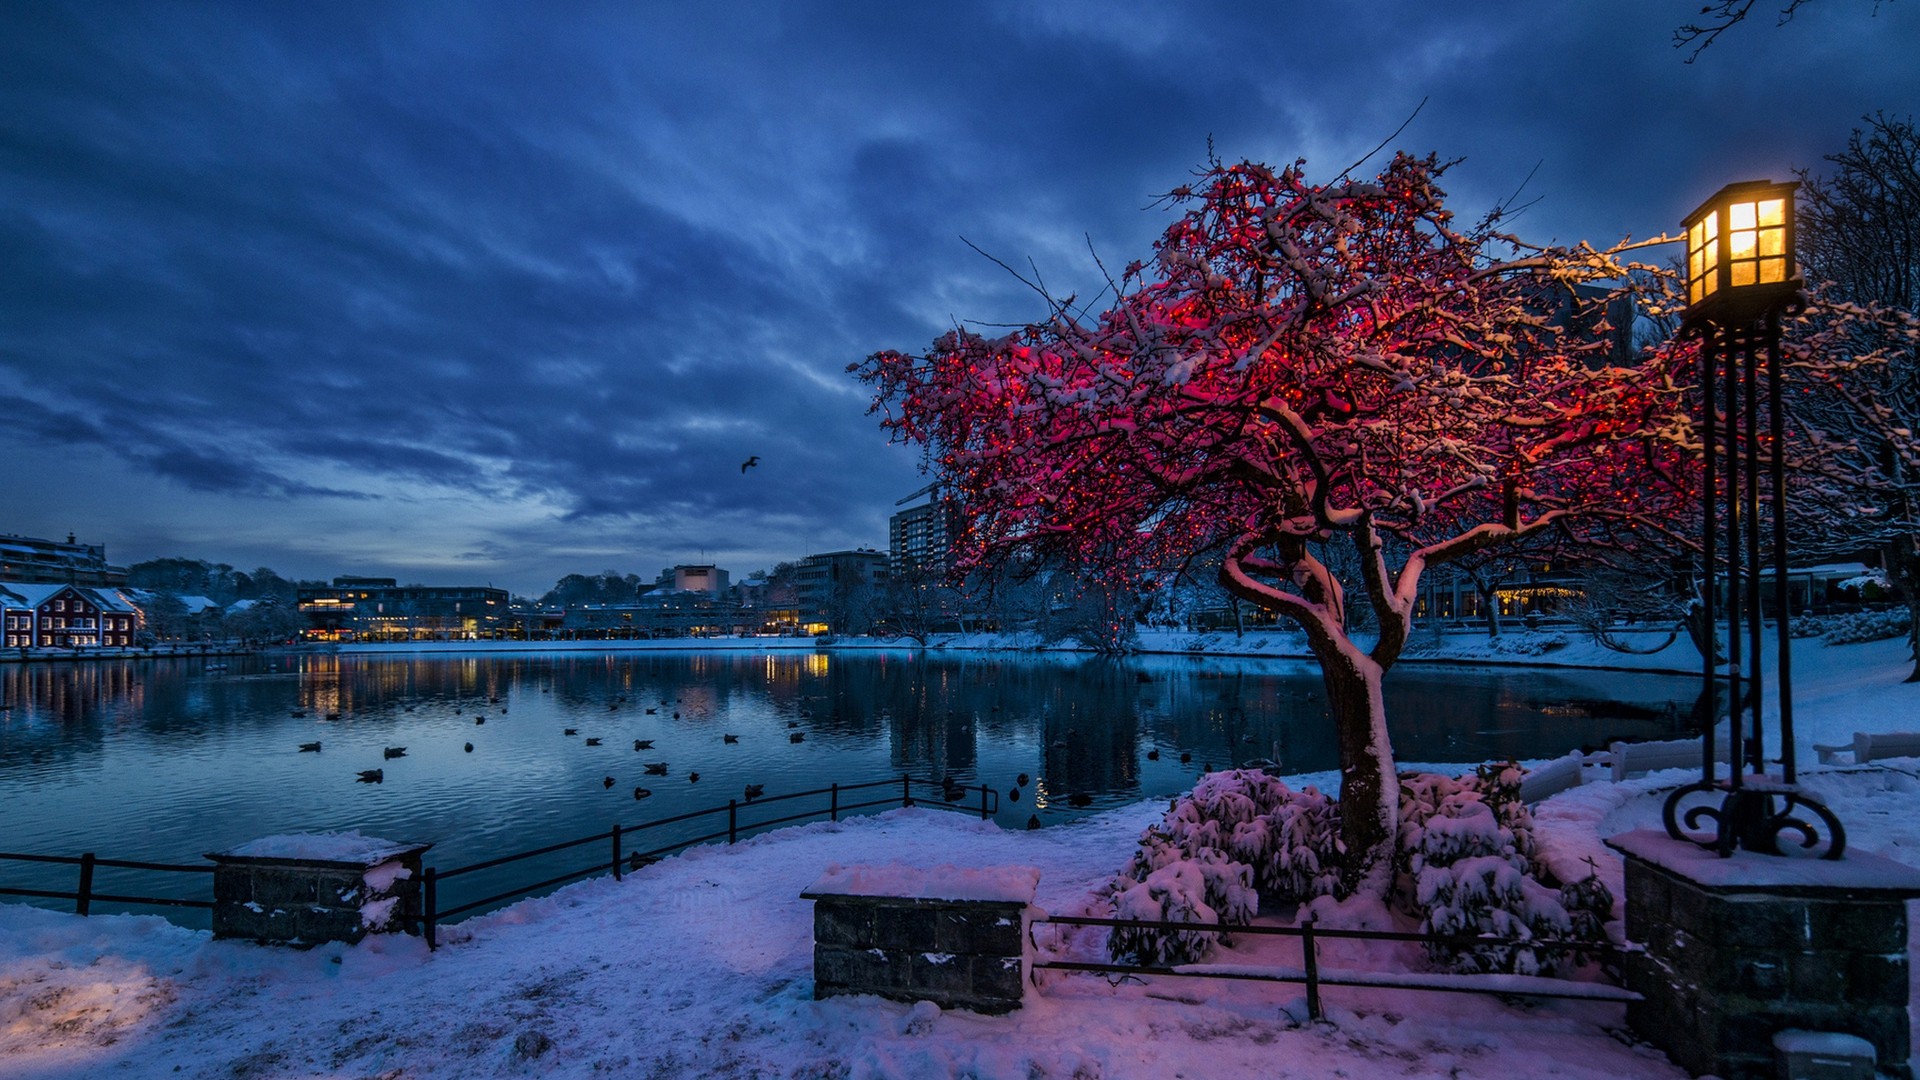 General 1920x1080 trees city cityscape Norway evening winter snow lights water lake clouds branch house reflection birds building lamp city lights blue pink red calm waters calm cold